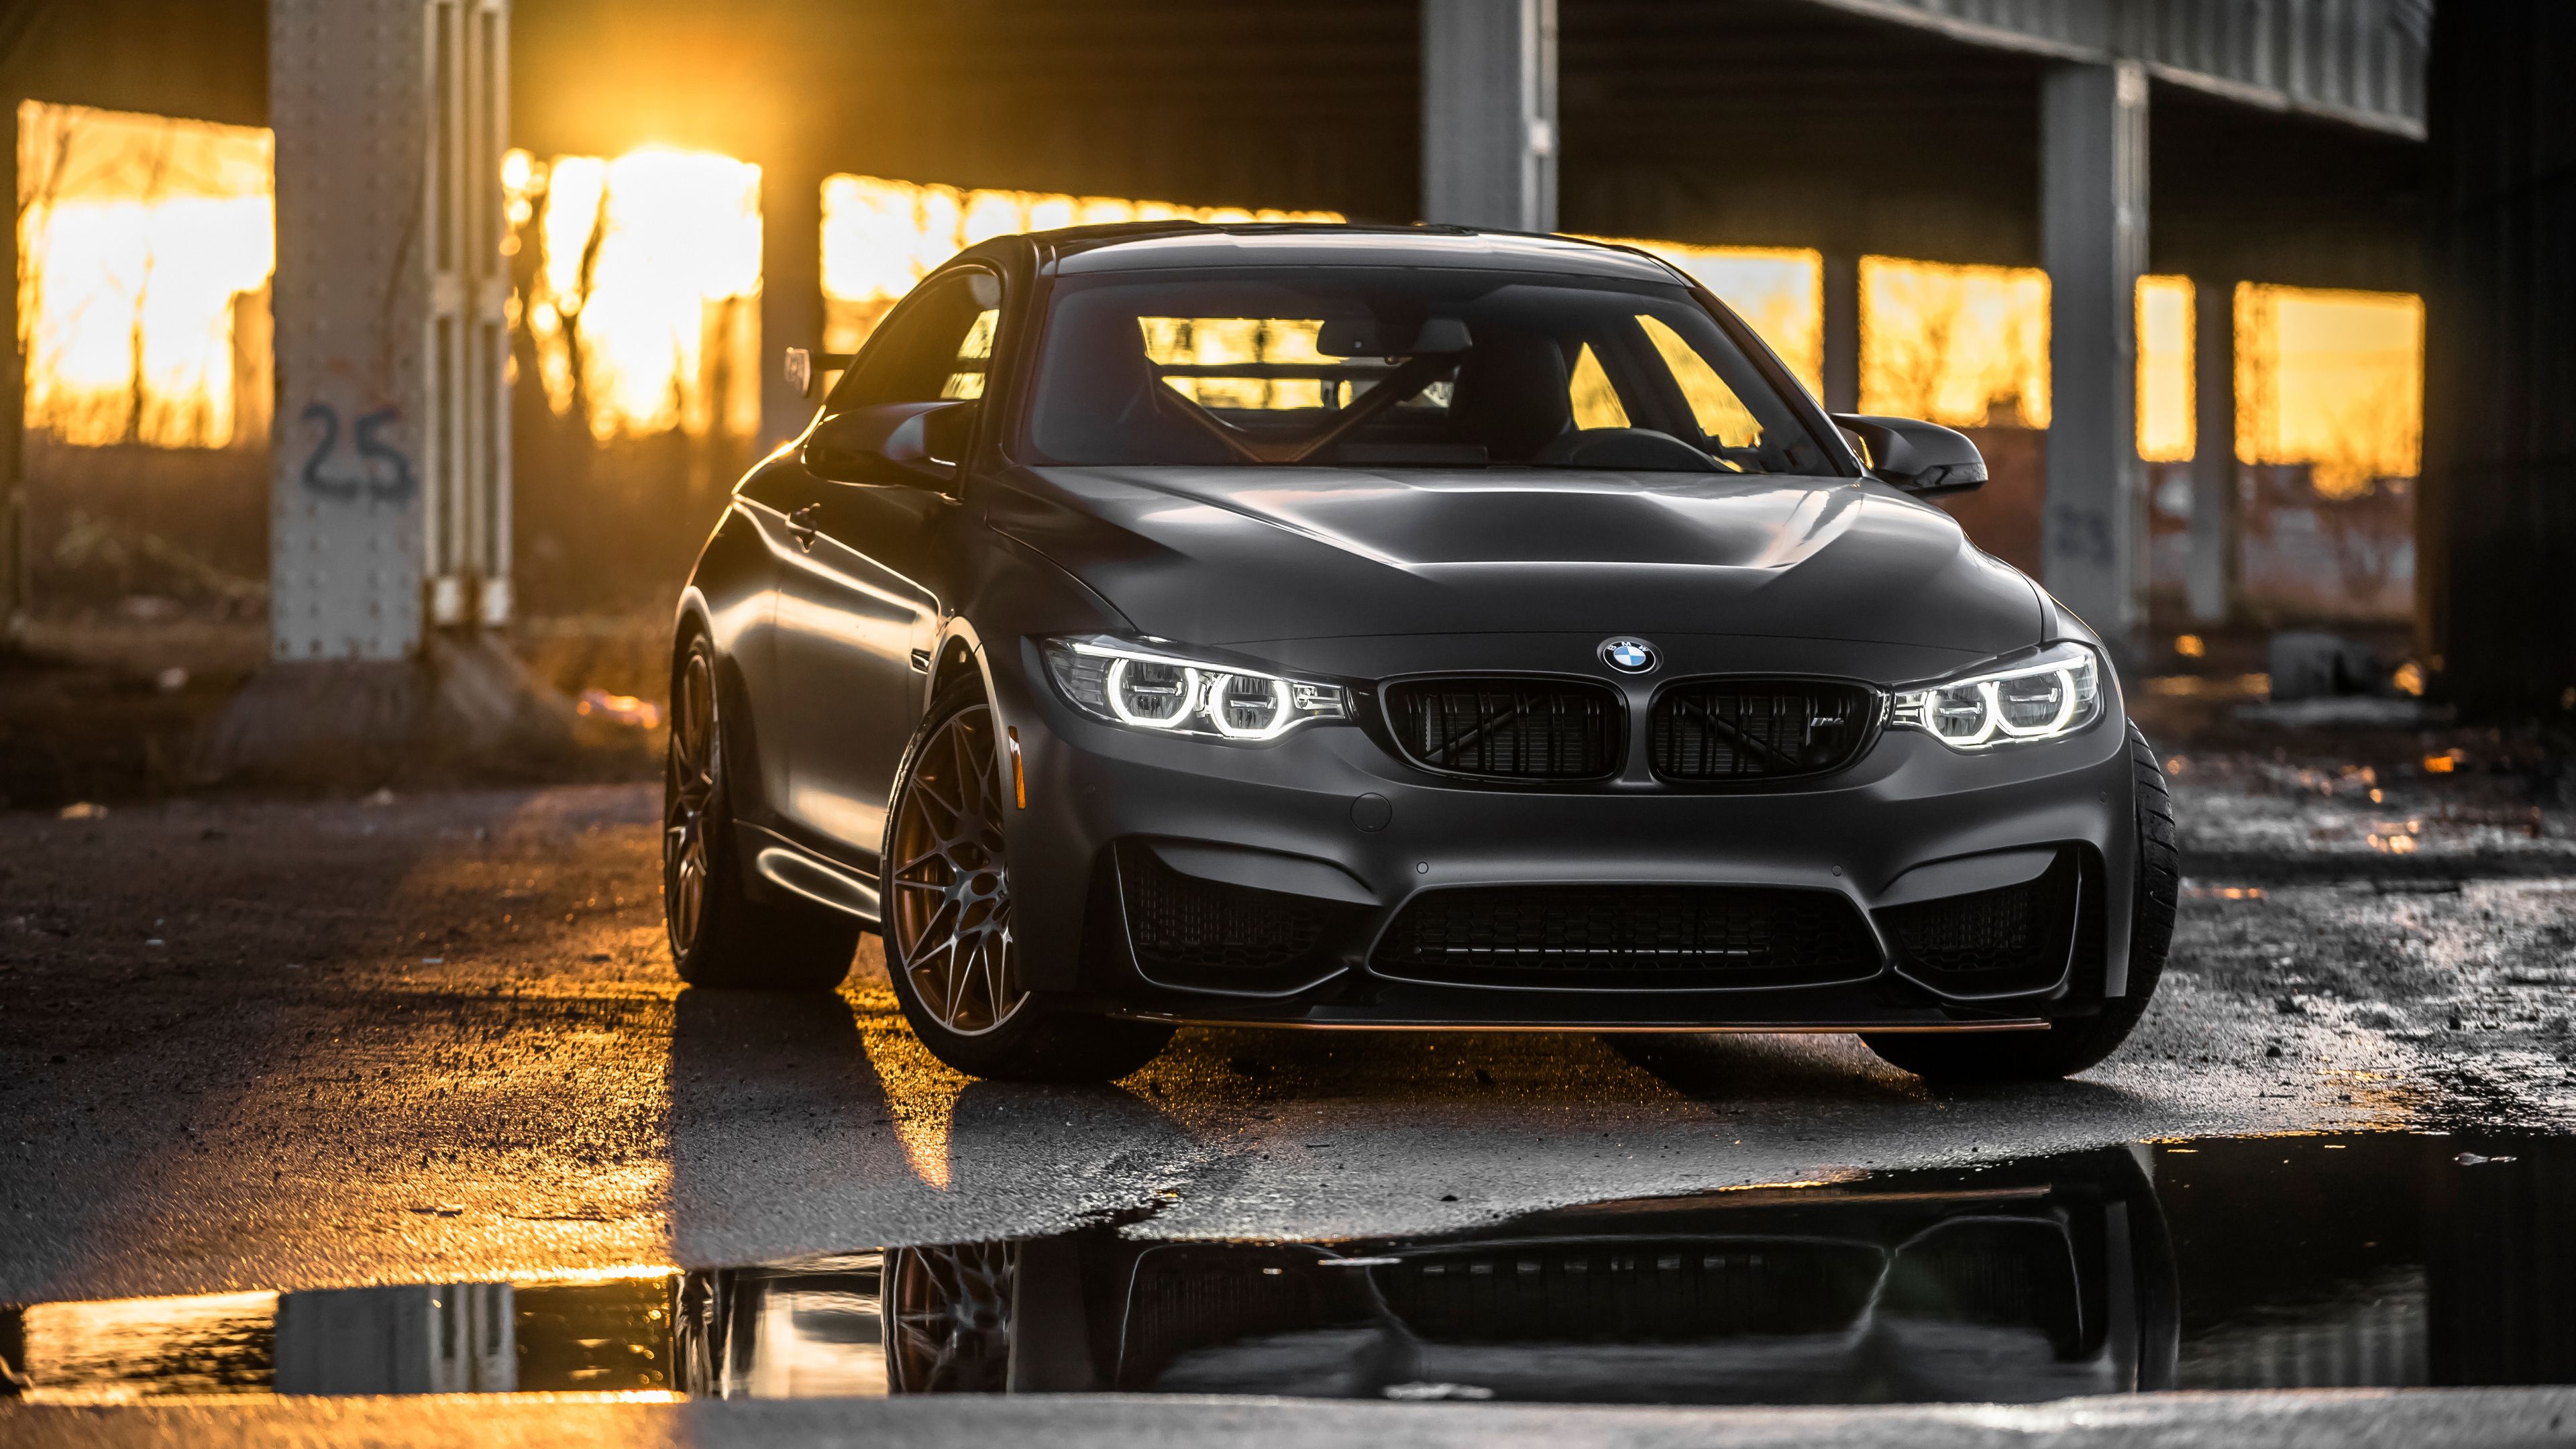 Free Download Bmw M4 Gts 4k Hd Wallpapers Cars Wallpapers Bmw Wallpapers Bmw 3840x2160 For Your Desktop Mobile Tablet Explore 20 Bmw Backgrounds Bmw Wallpaper Bmw Wallpapers Bmw E36 Wallpaper